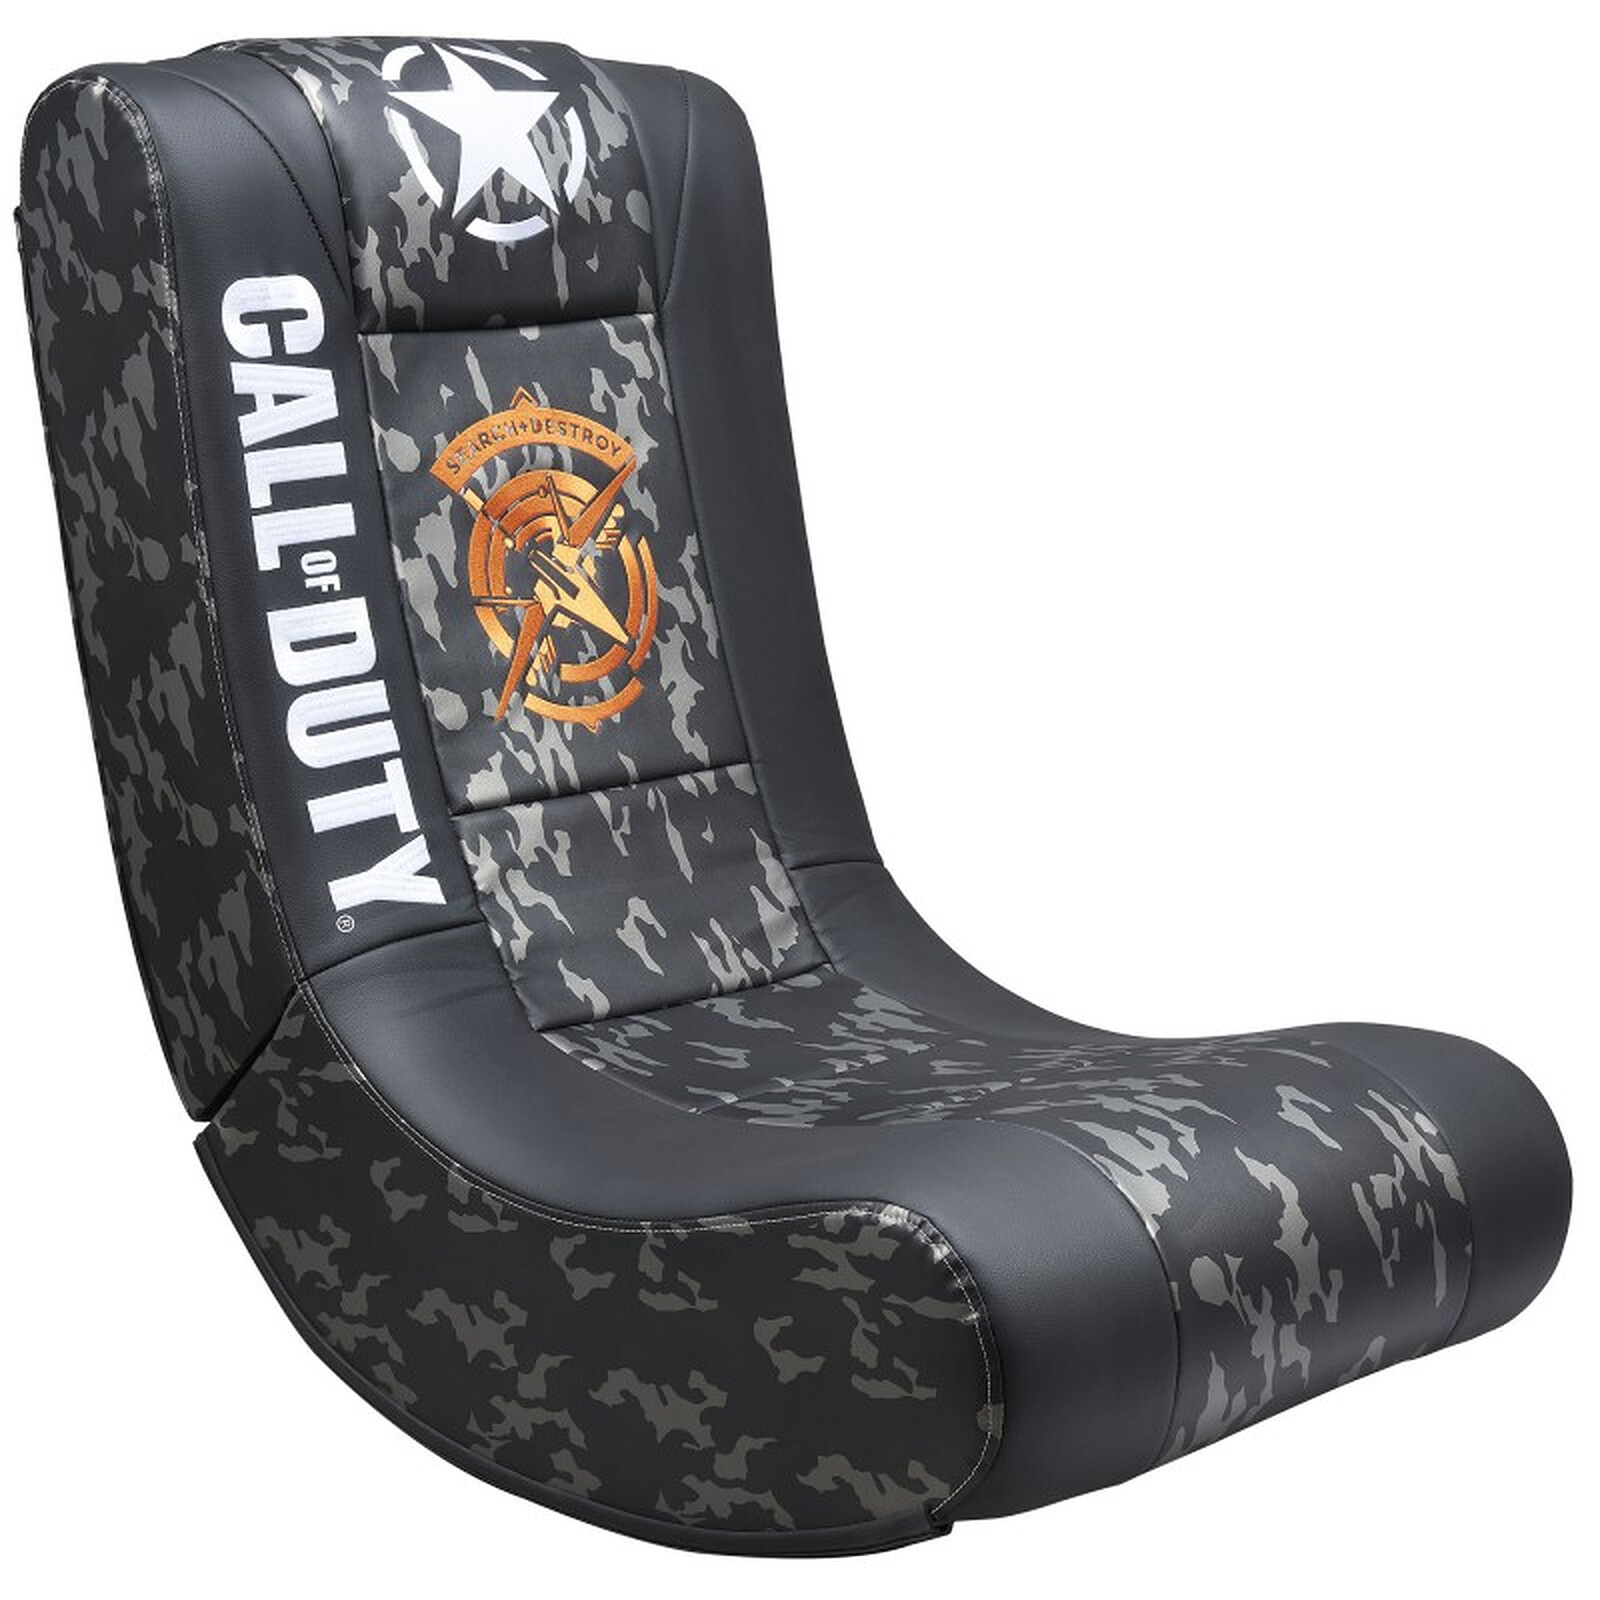 Subsonic Fauteuil Rock'N'Seat COD Call of Duty - Fauteuil gamer - LDLC